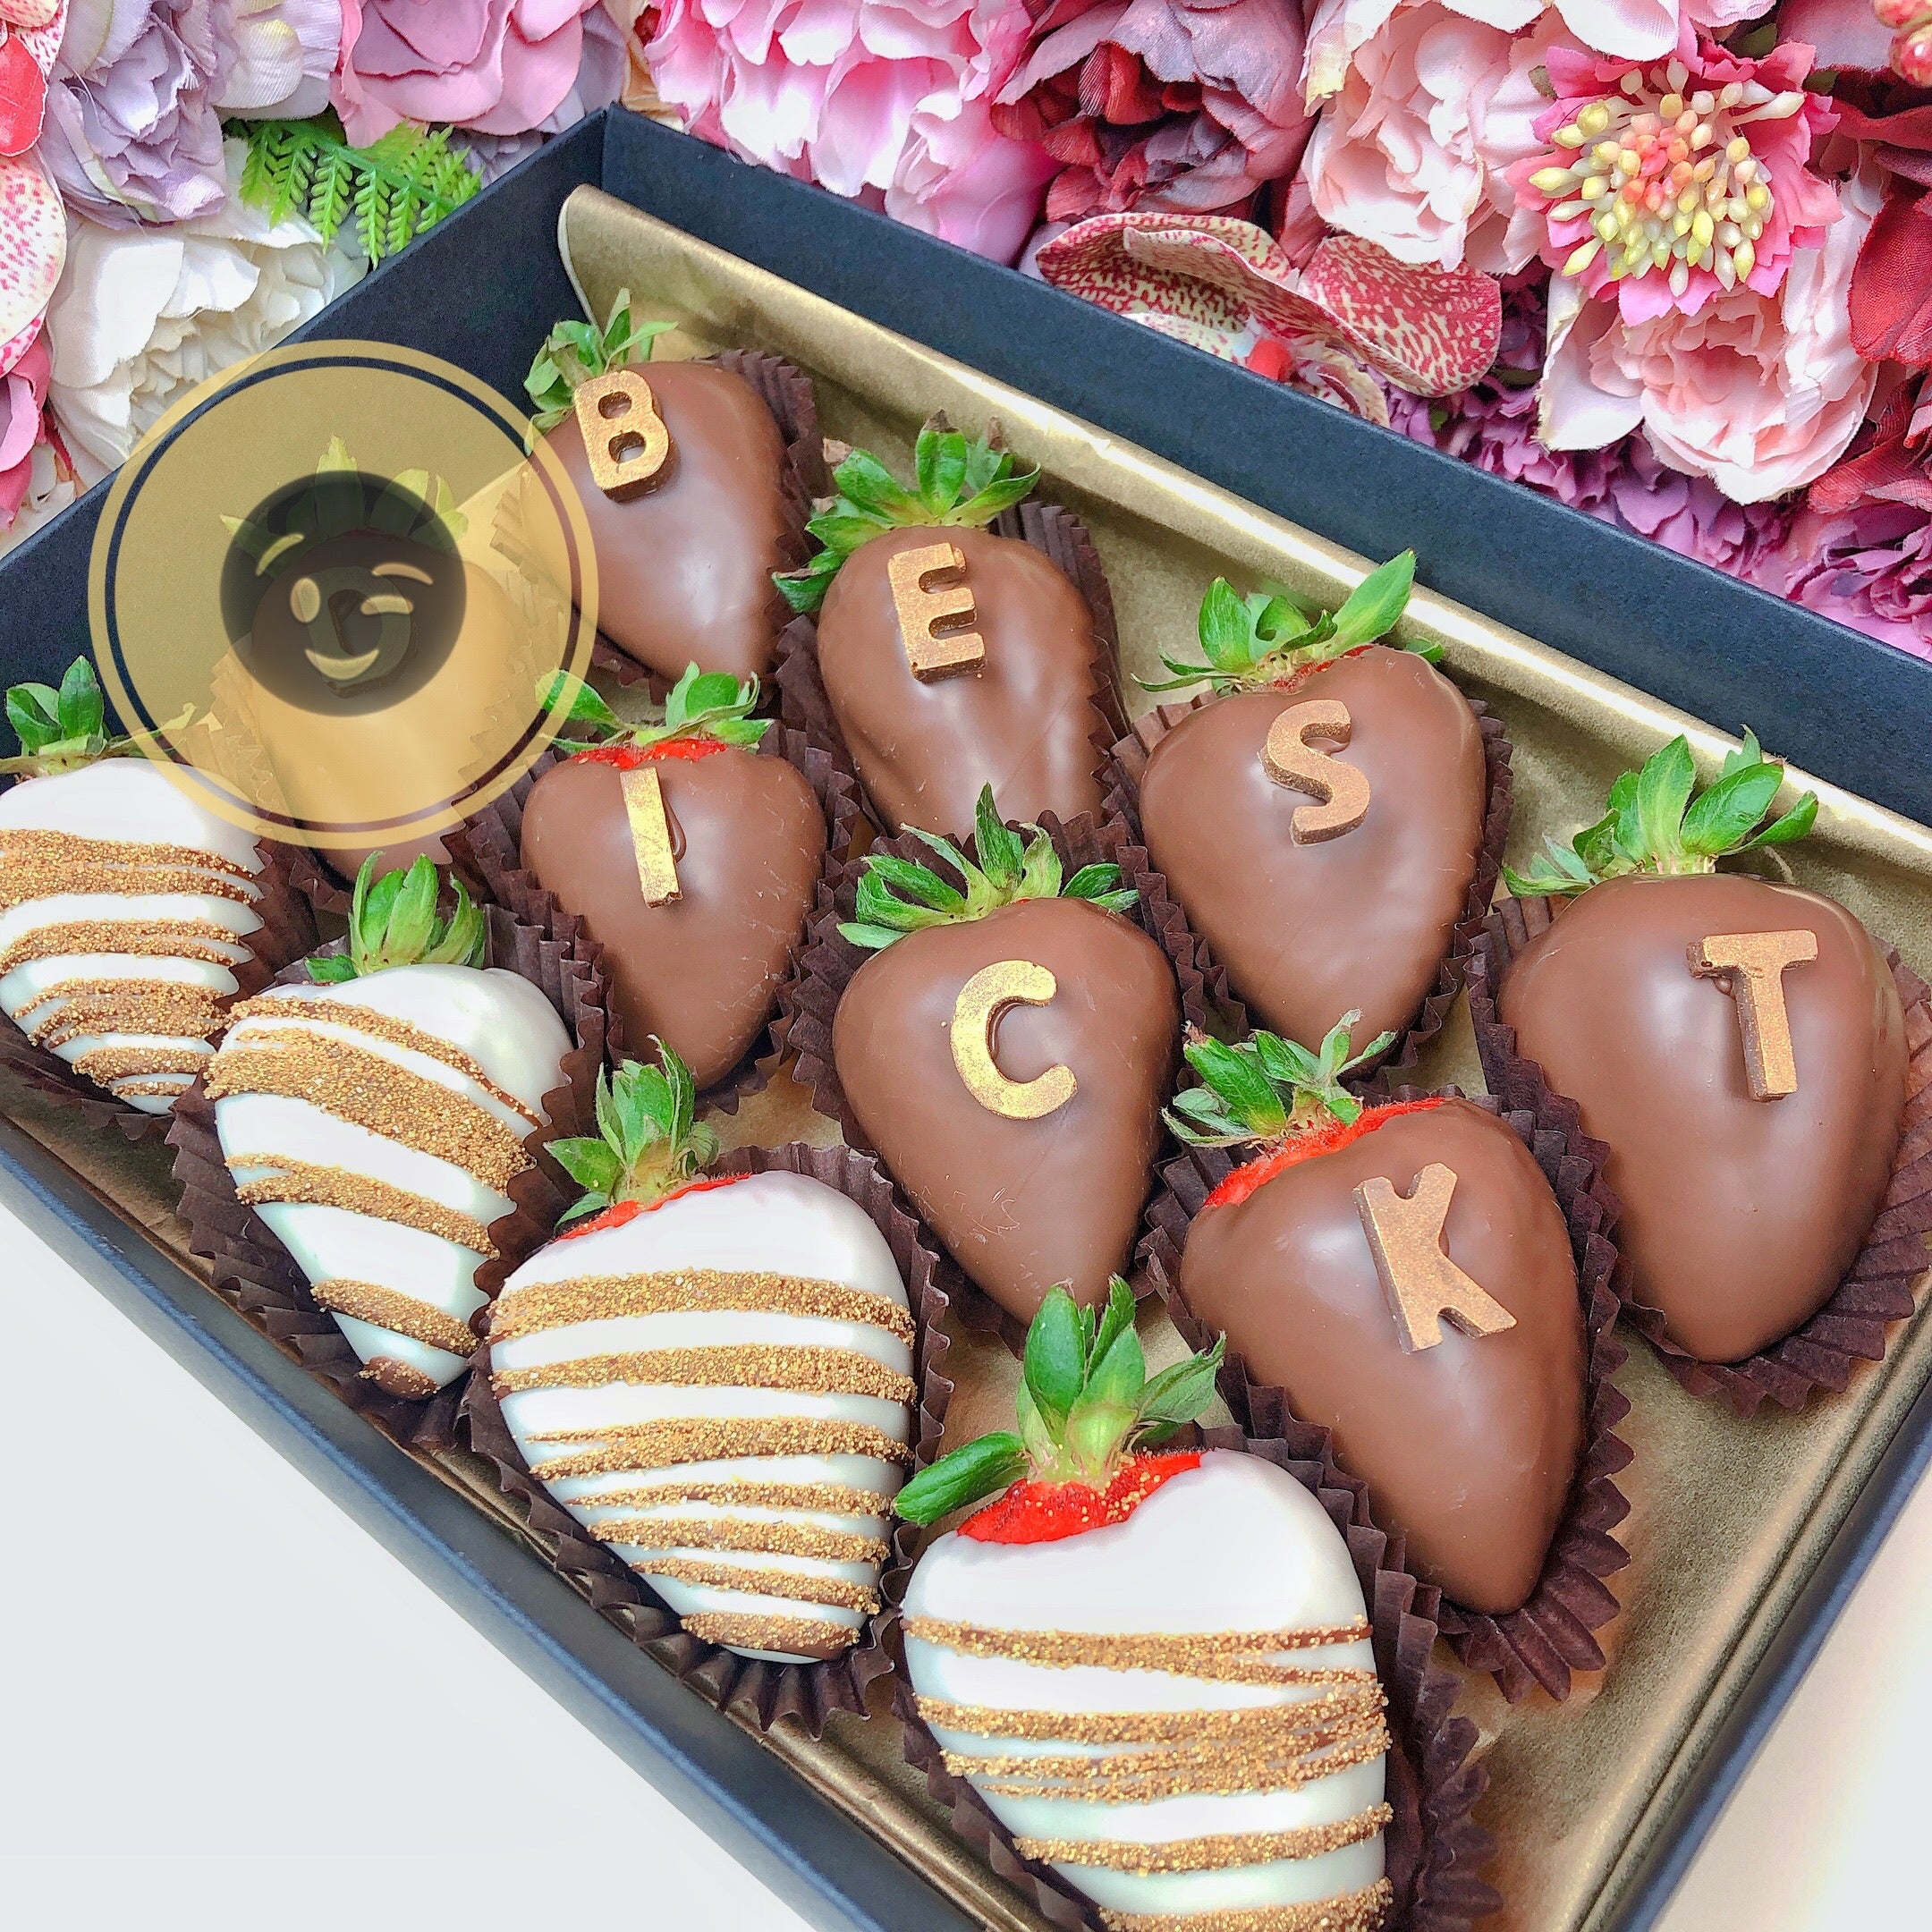 Best Dick chocolate strawberry gift box with personolised letters, cheeky gift present for him, sexual present